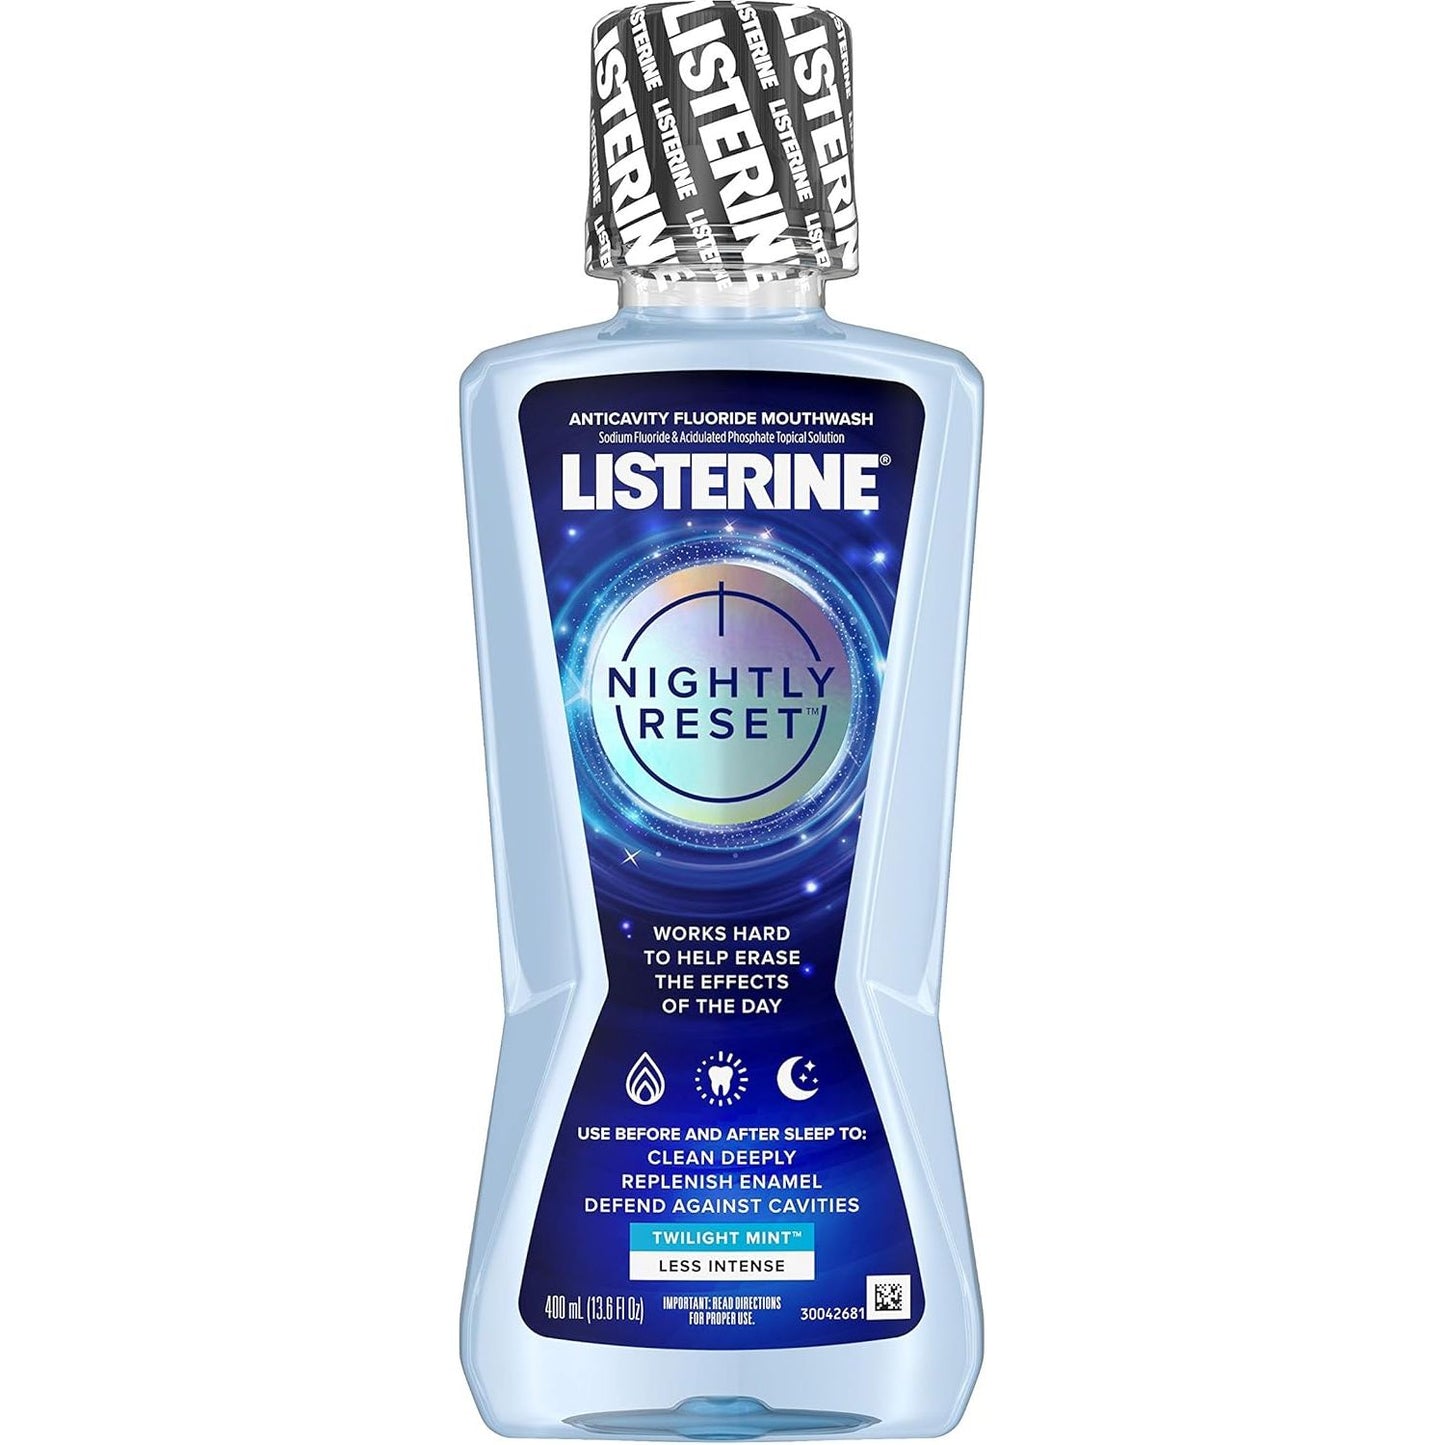 Listerine Nightly Reset Alcohol-Free Anticavity Nighttime Mouthwash, Deep Clean that Fights Bad Breath and Restores Enamel, Twilight Mint Flavor, 400mL